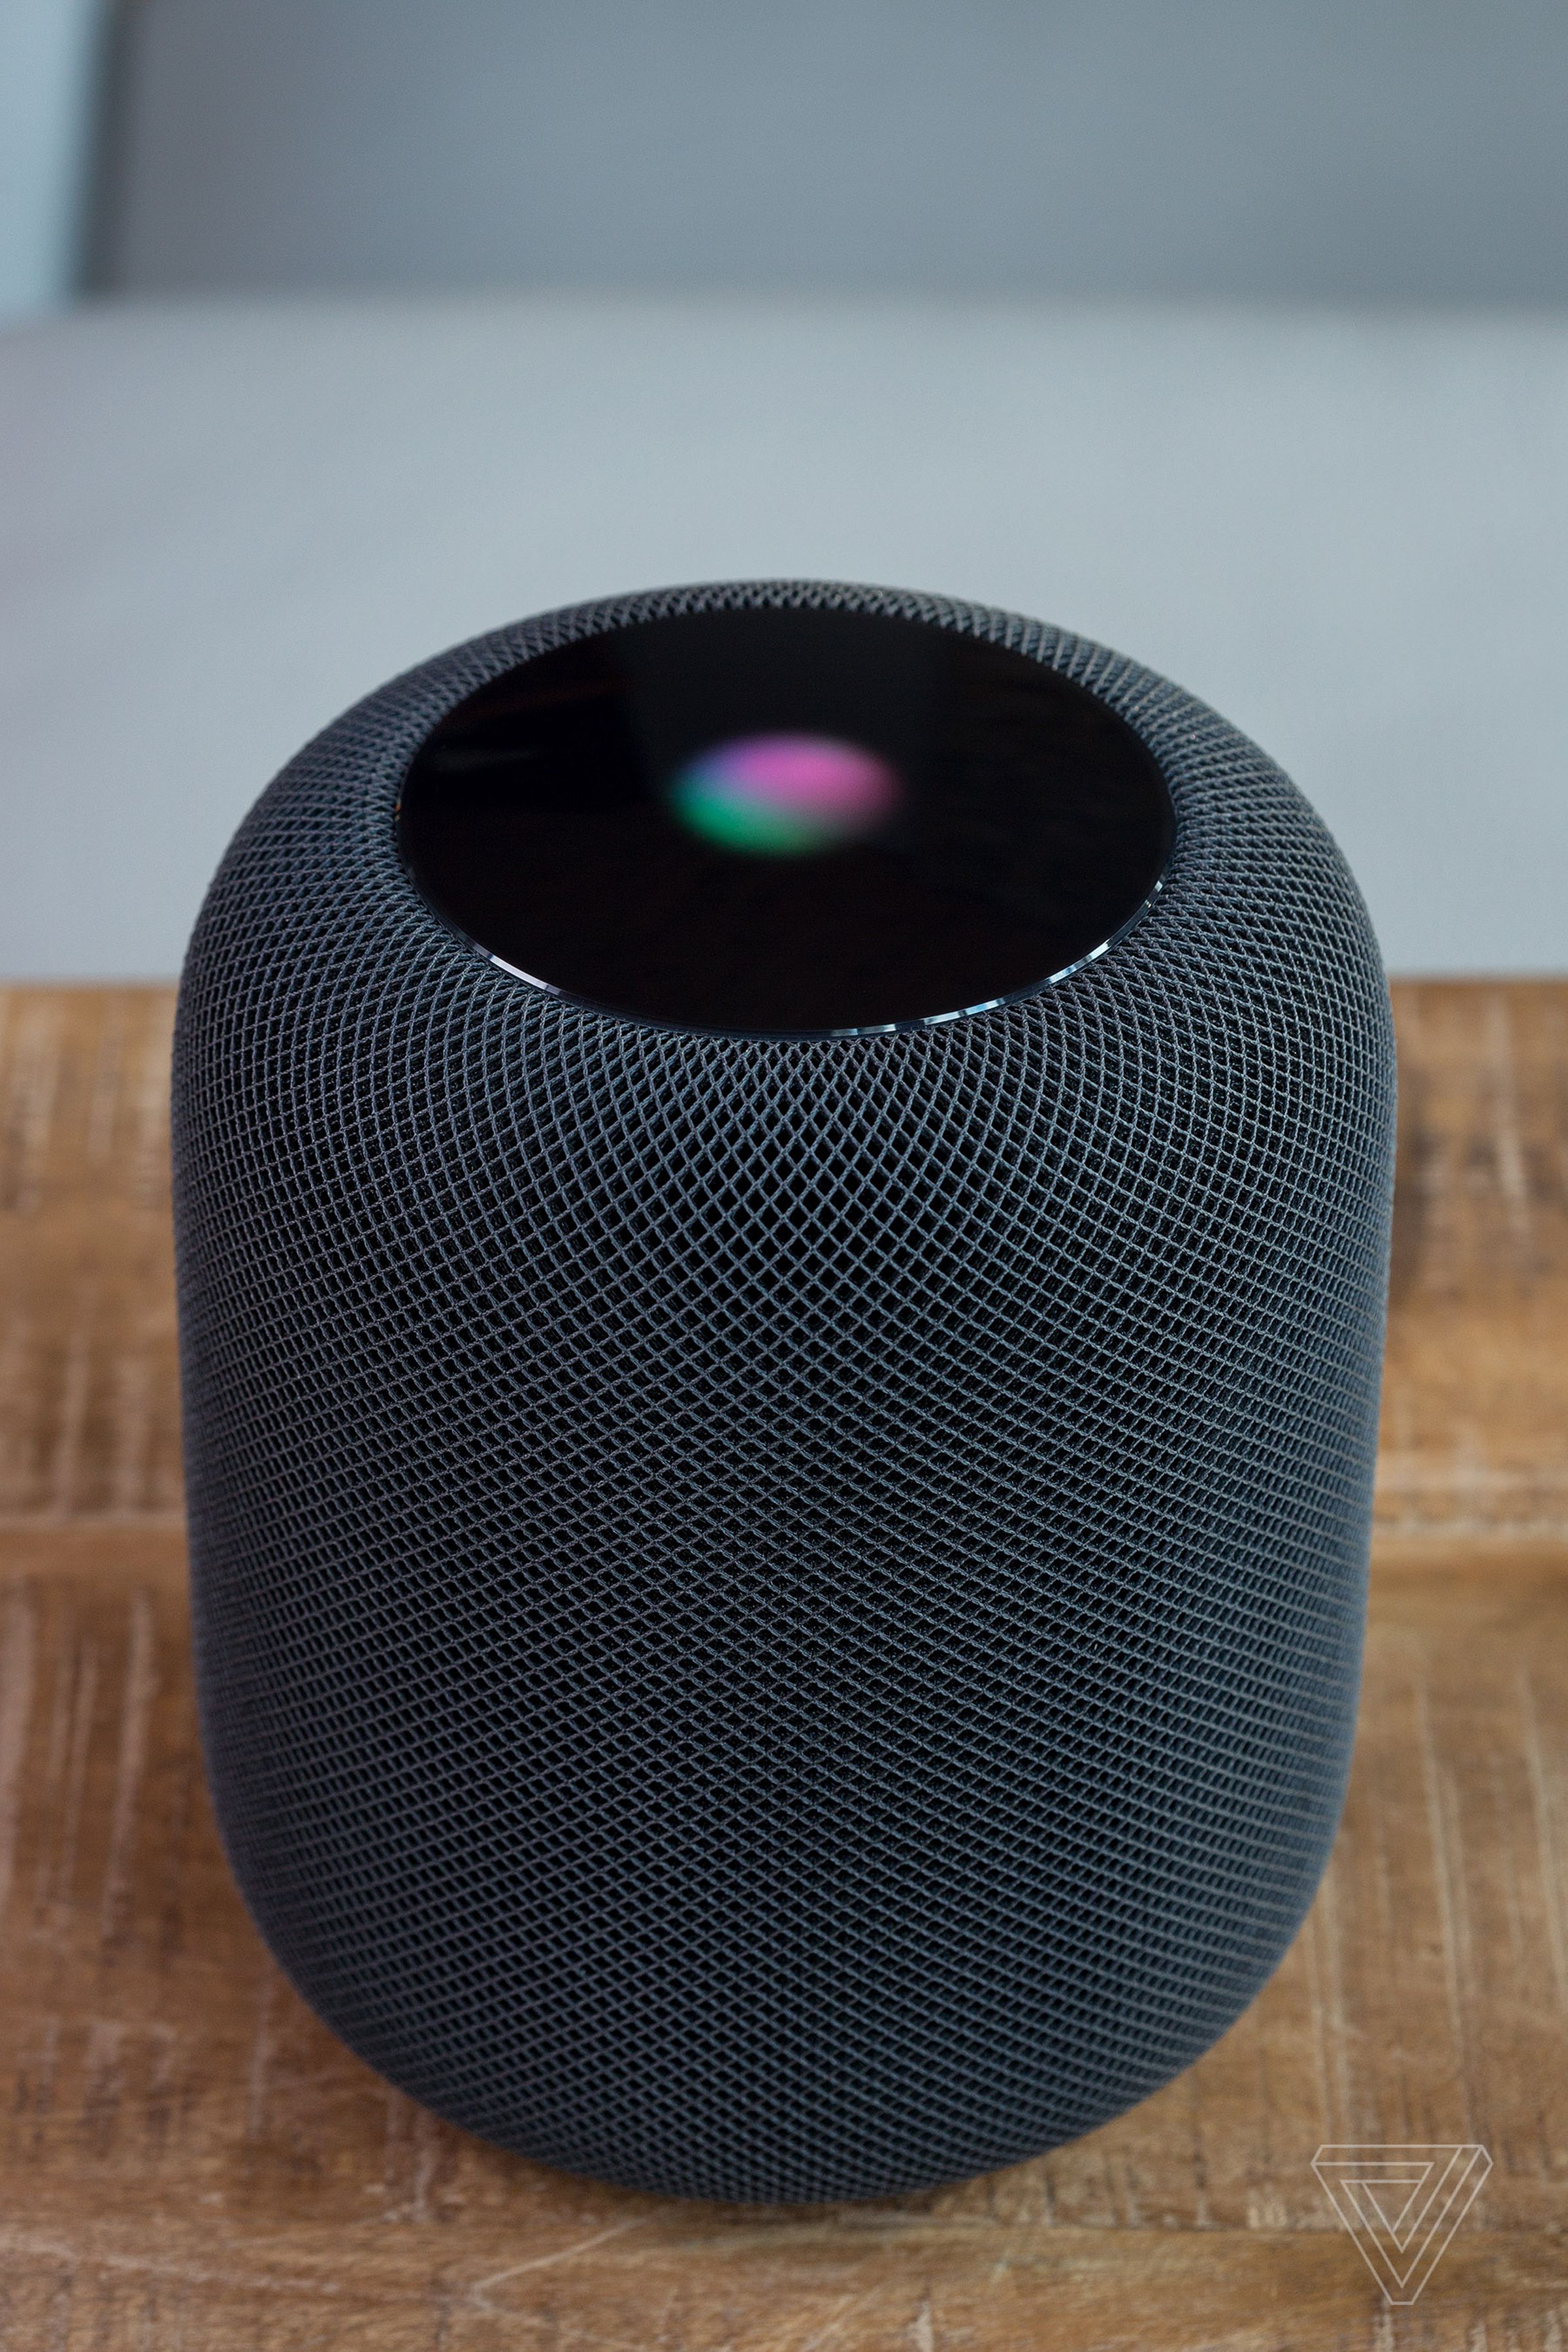 the homepod